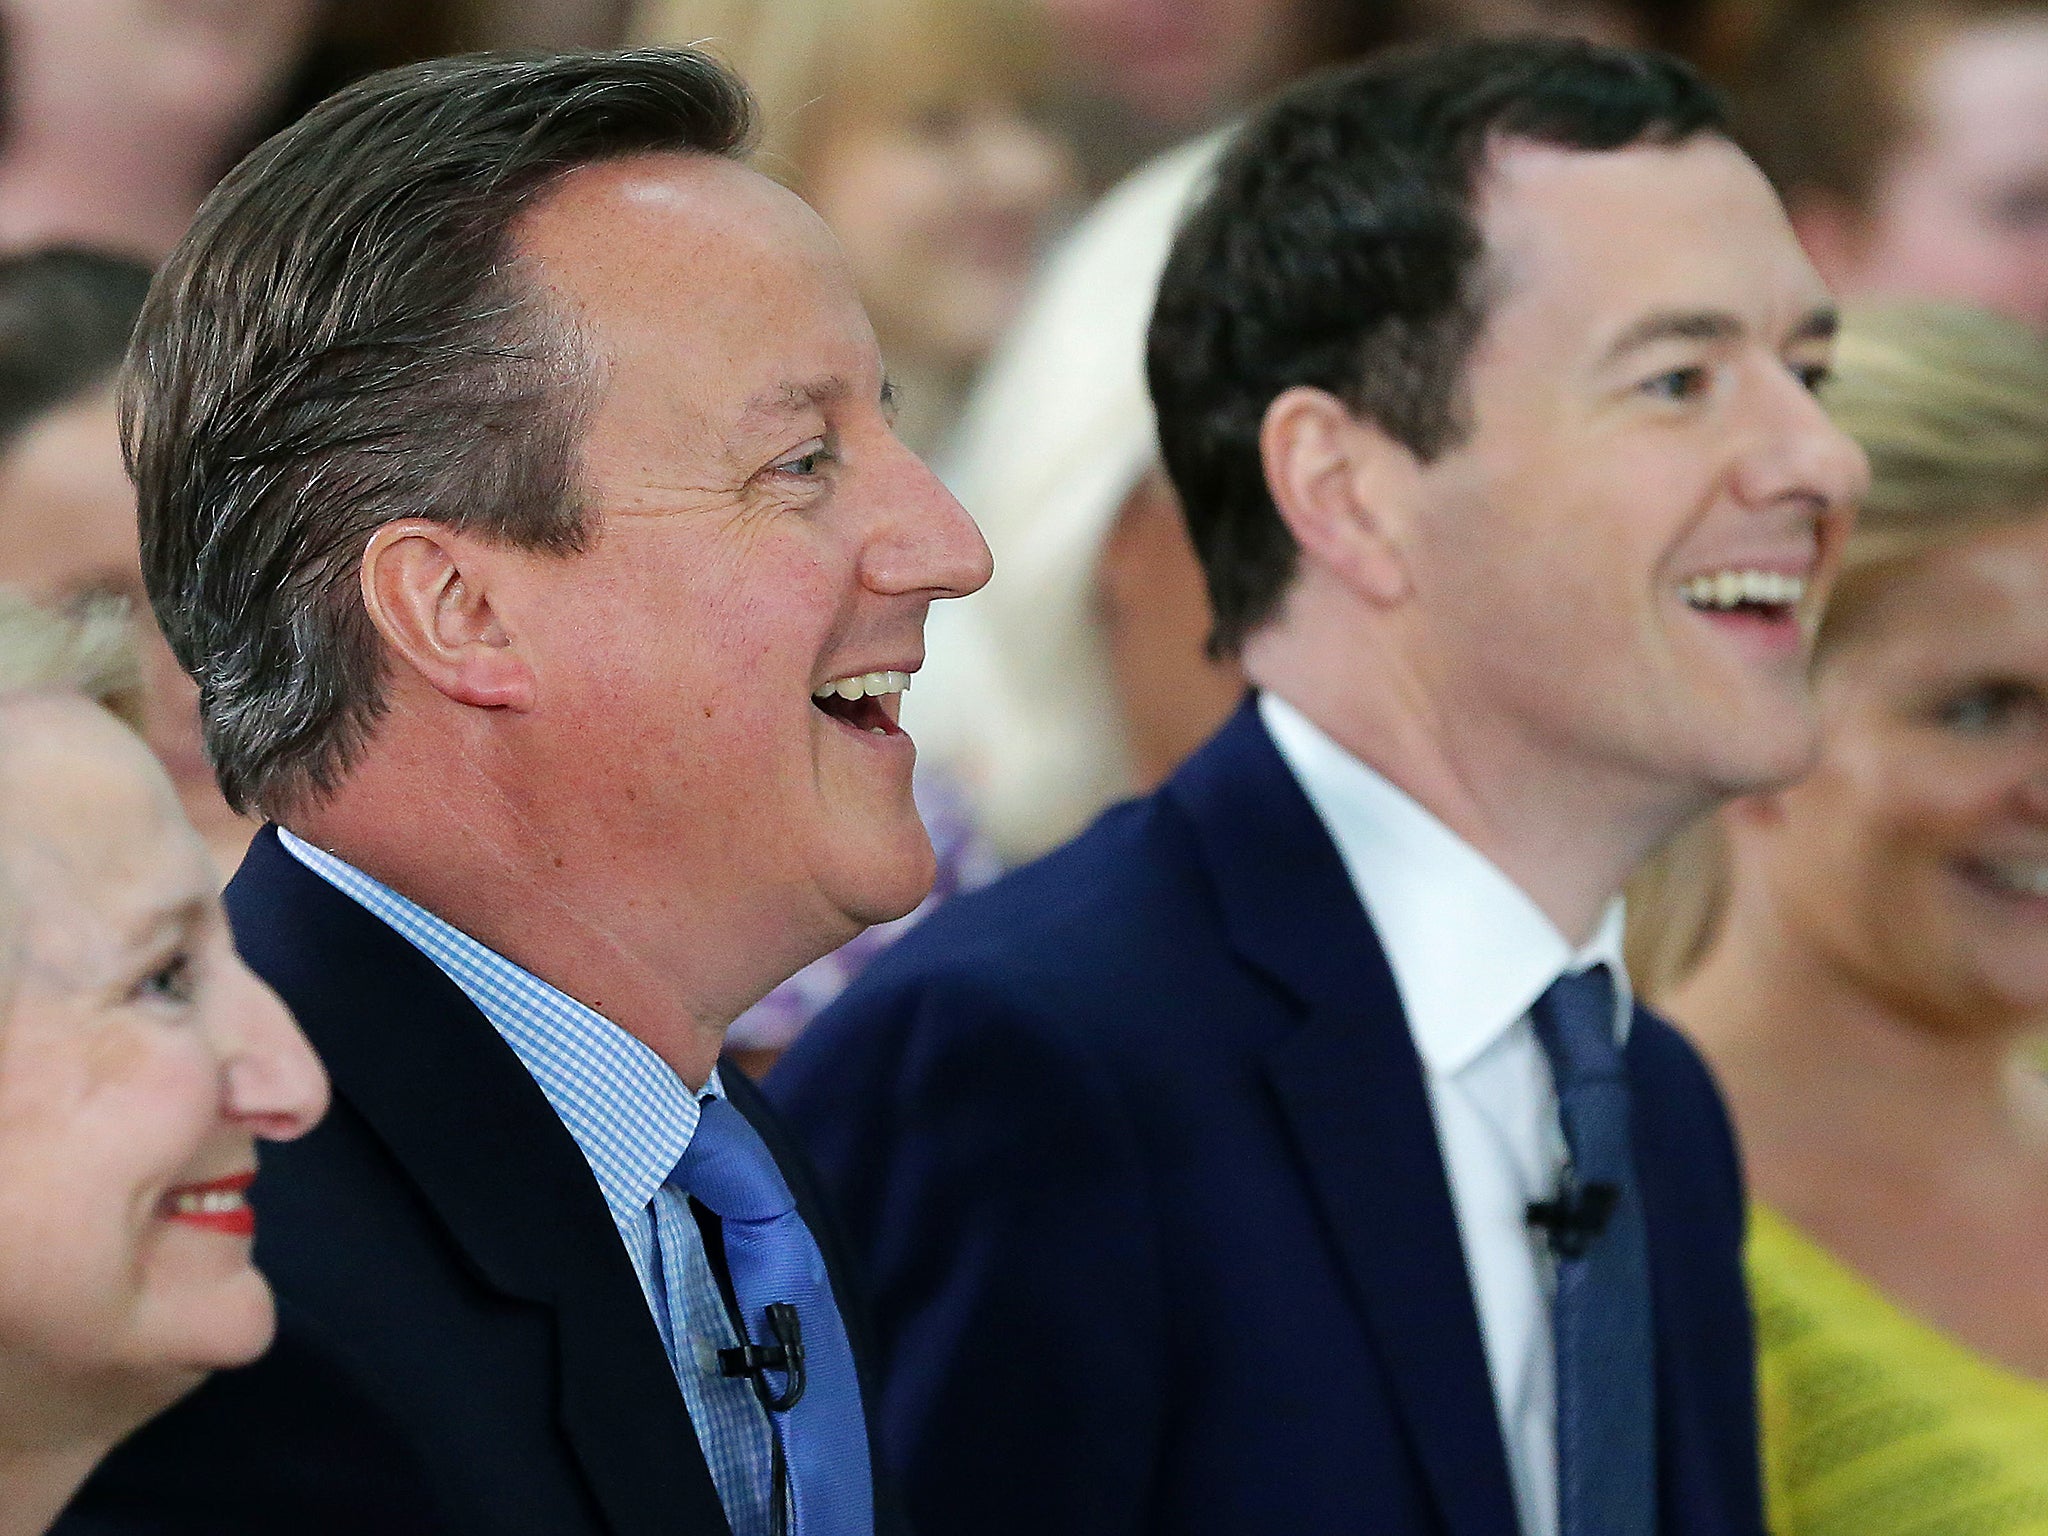 David Cameron and George Osborne are both speaking at the World Economic Forum in Davos for large fees